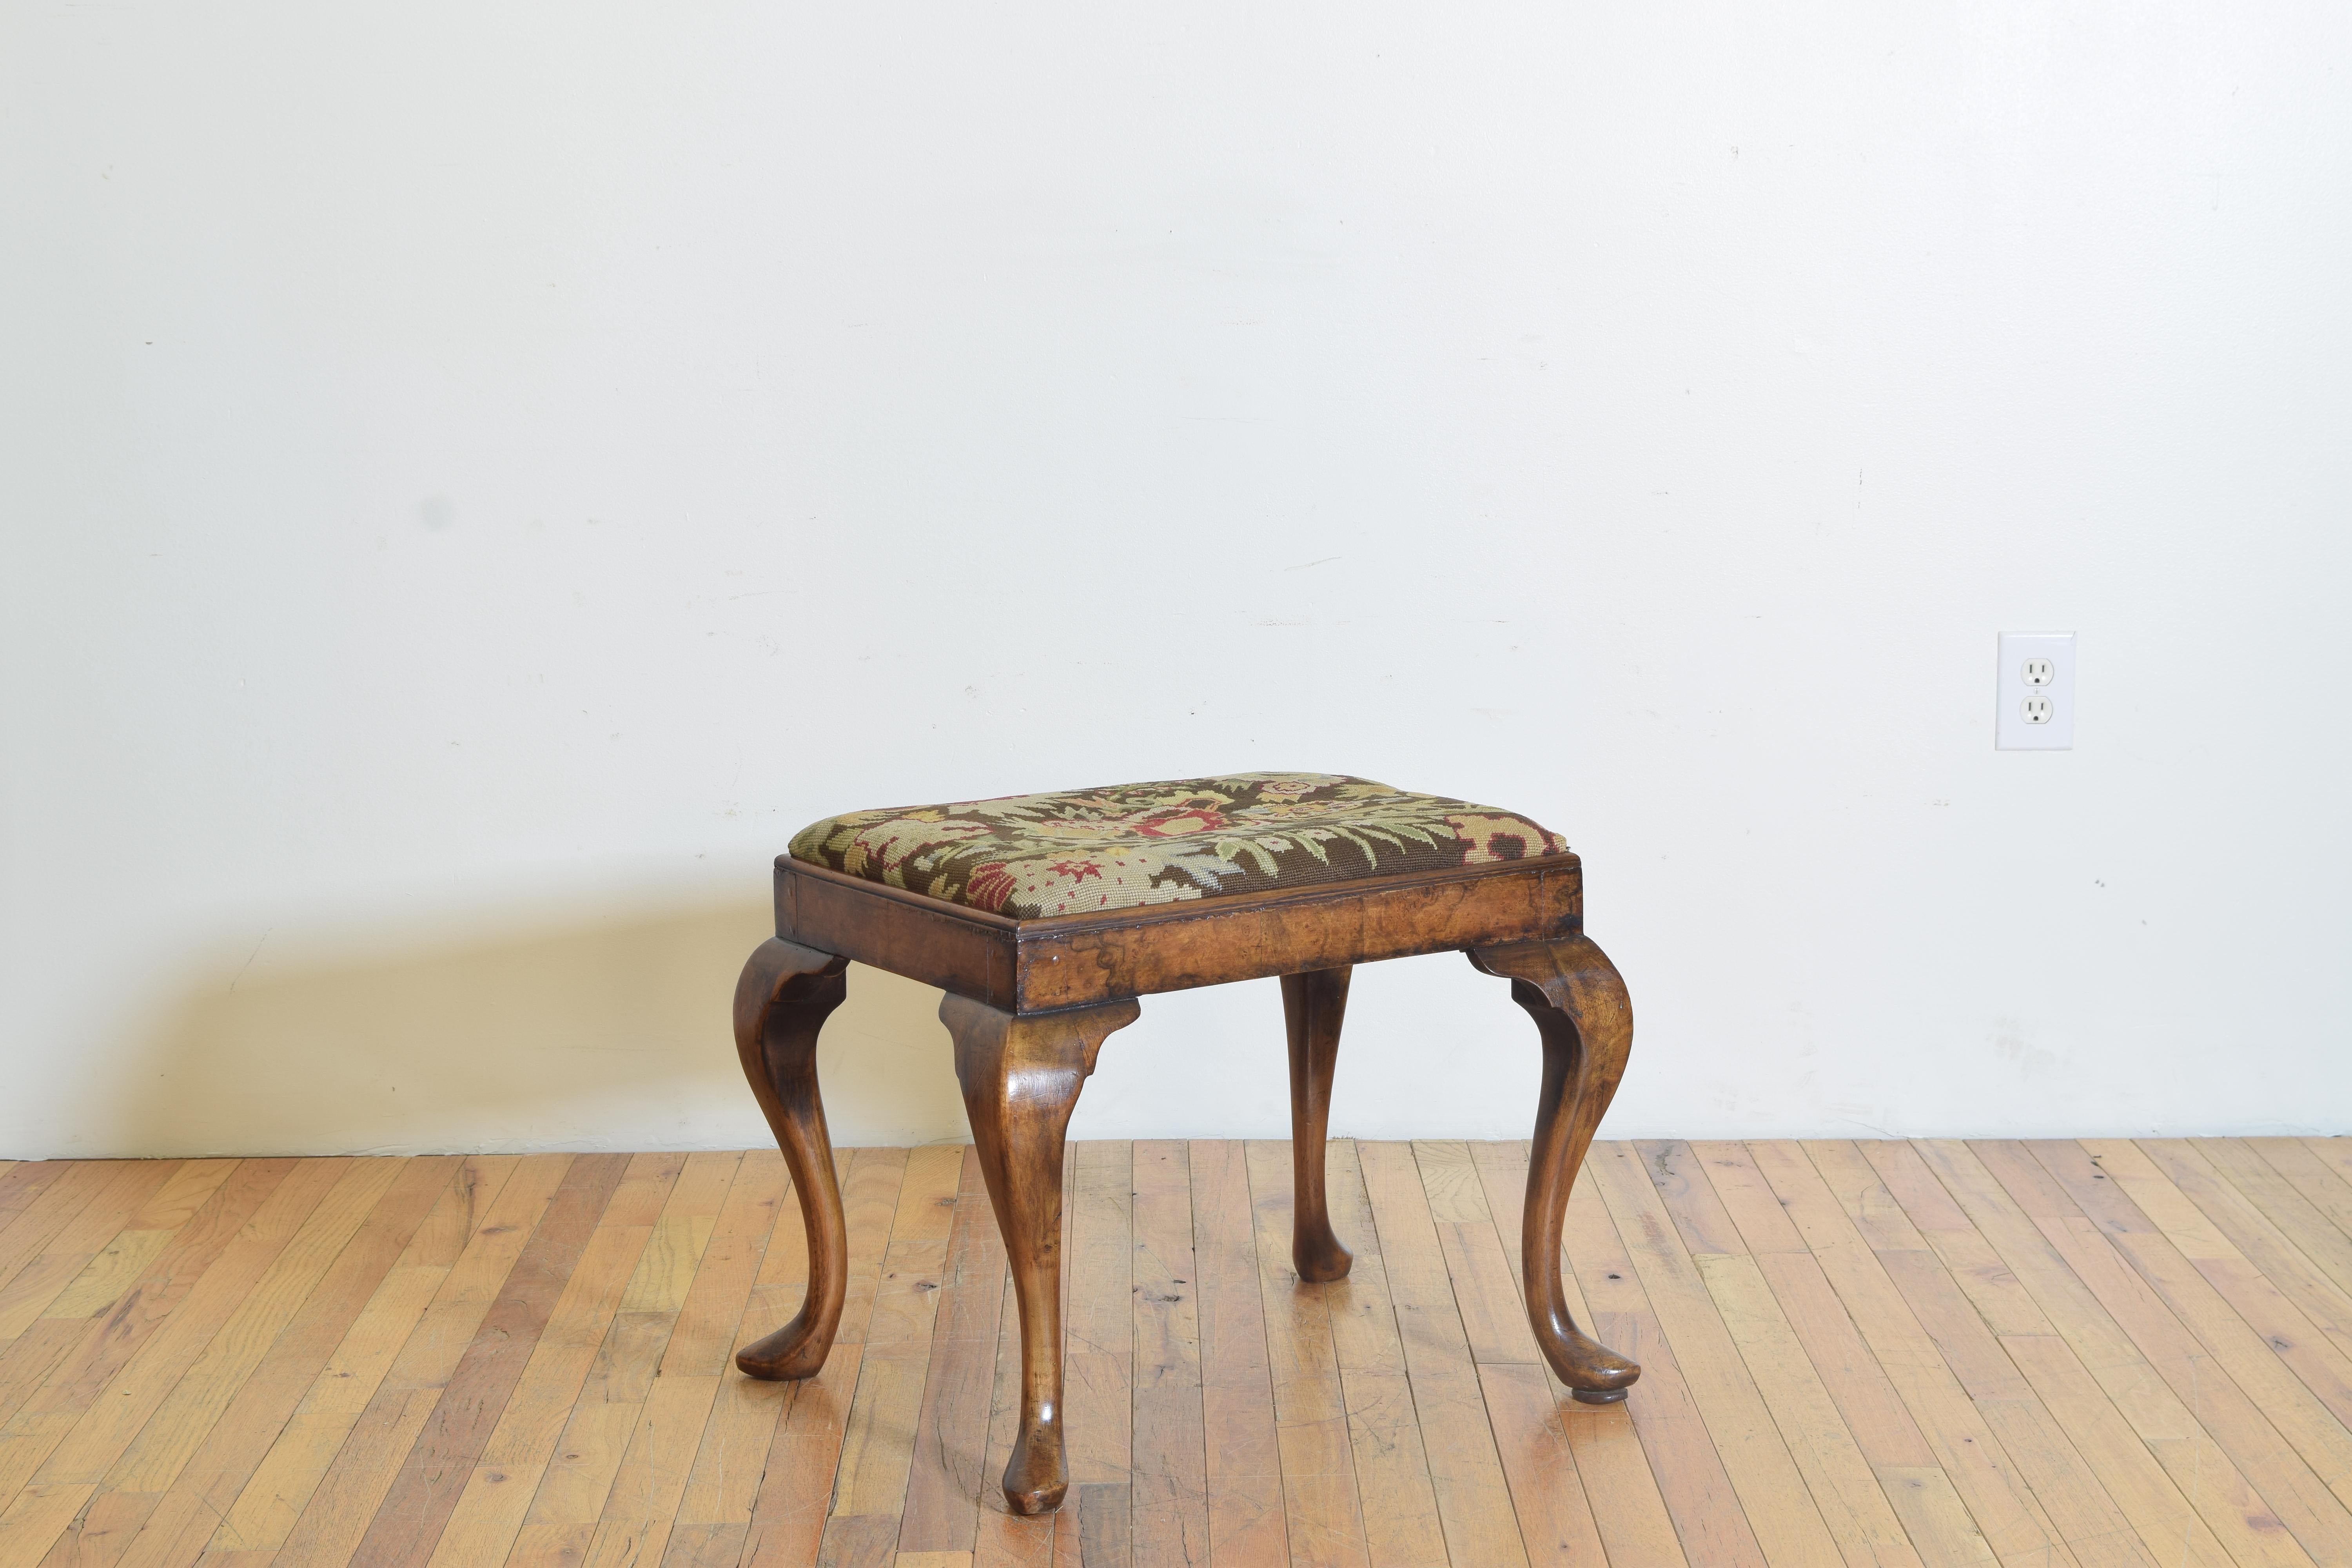 Having a drop in needlepoint upholstered seat, the bench with a molded edged frame and having shaped cabriole legs with a stylized scroll ending in pointed Queen Anne feet